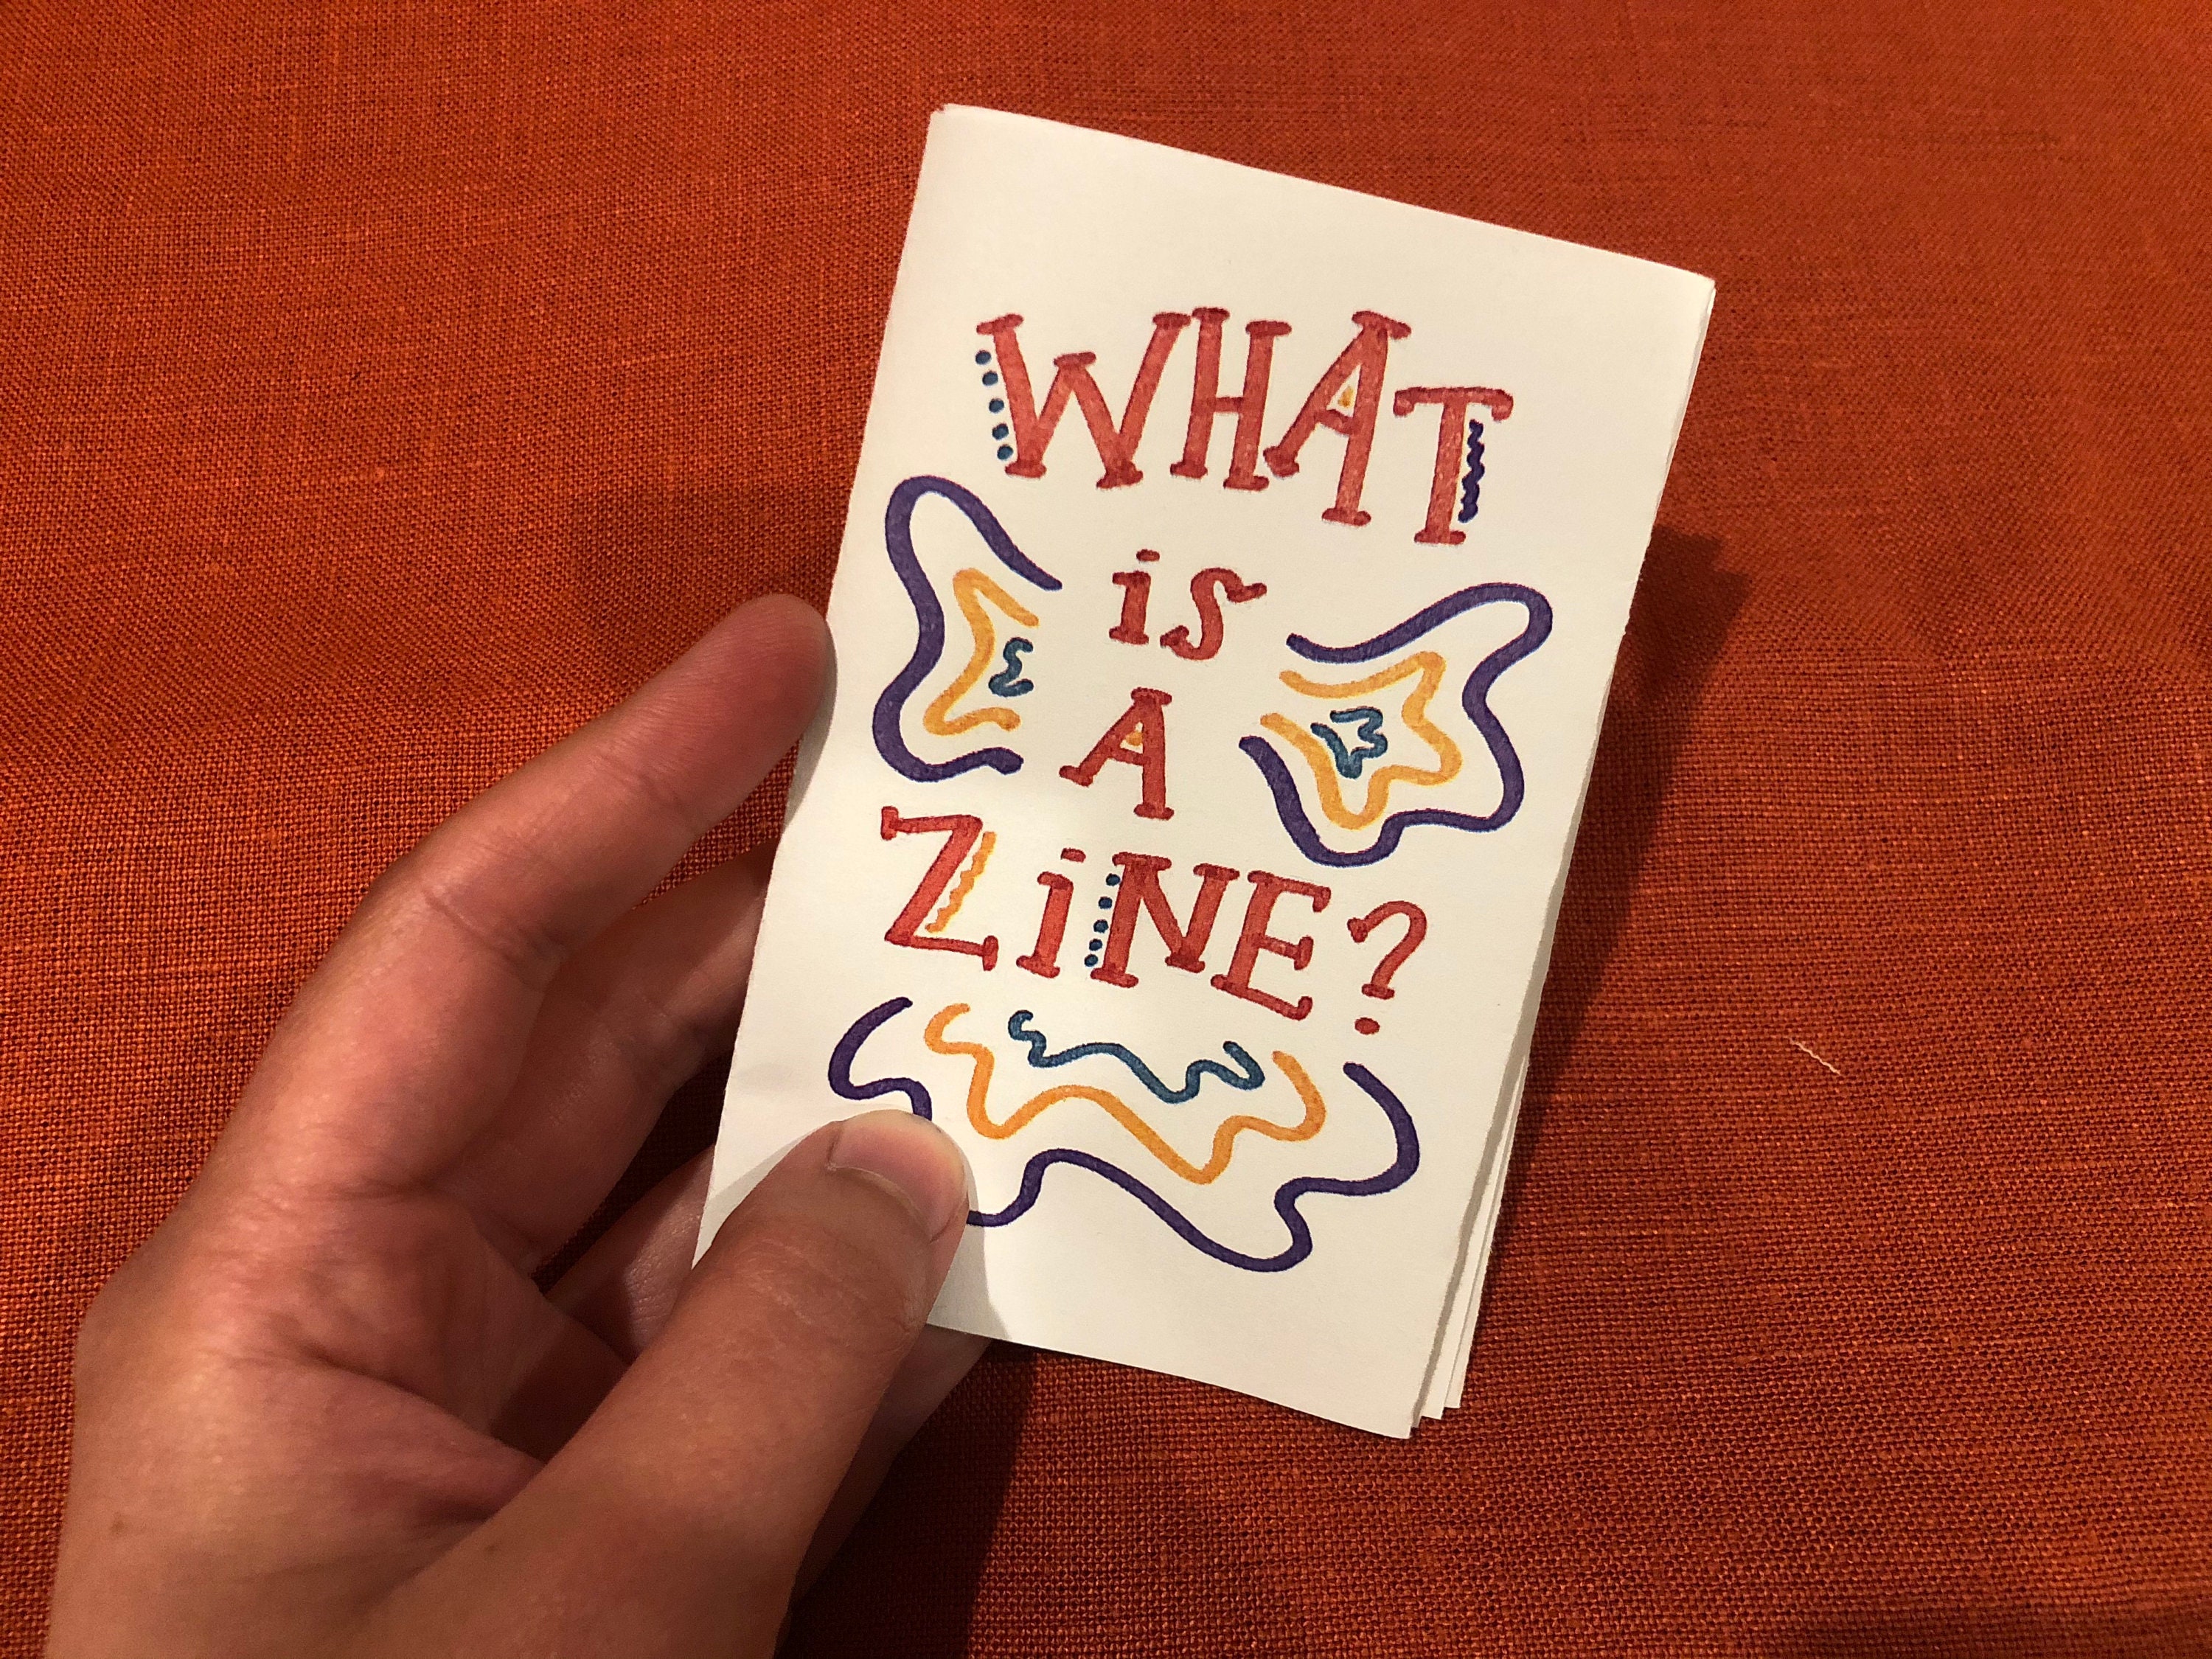 Zine - What is a Zine? Definition, Types, Uses